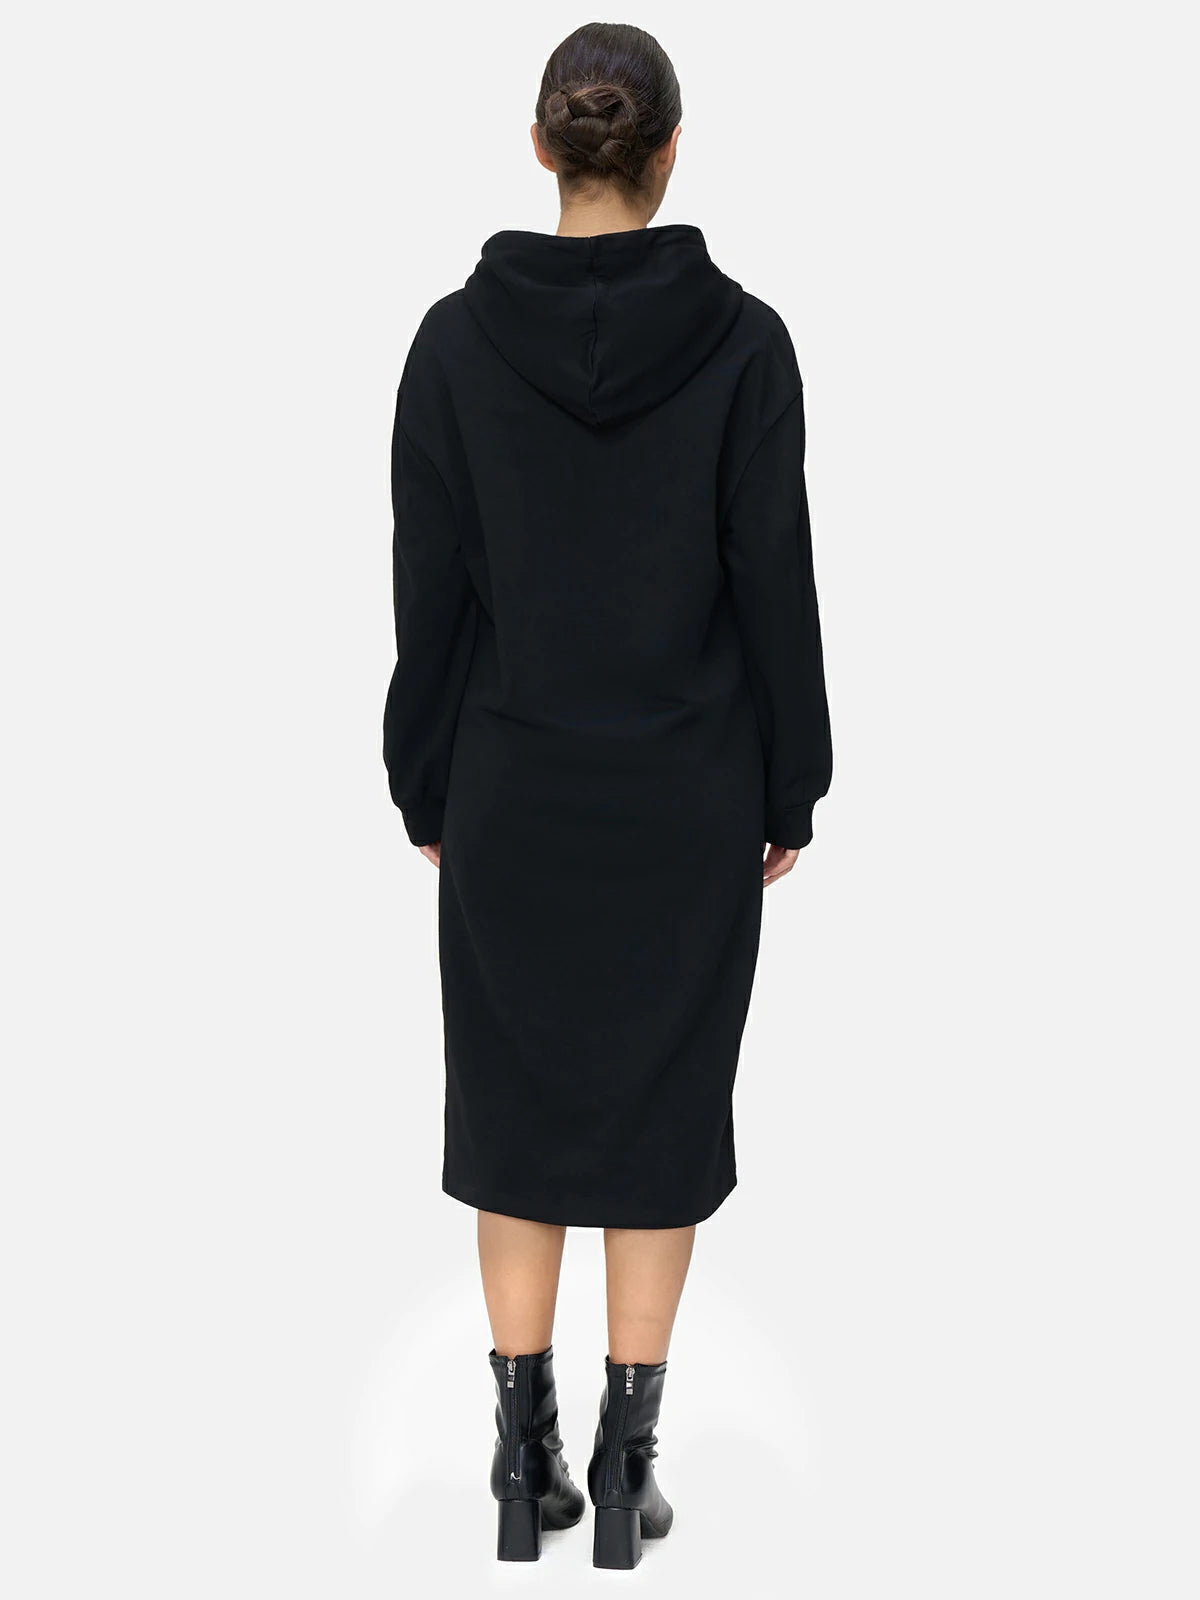 Contemporary Fashion: Embrace contemporary fashion with the modern design of this sweatshirt dress.